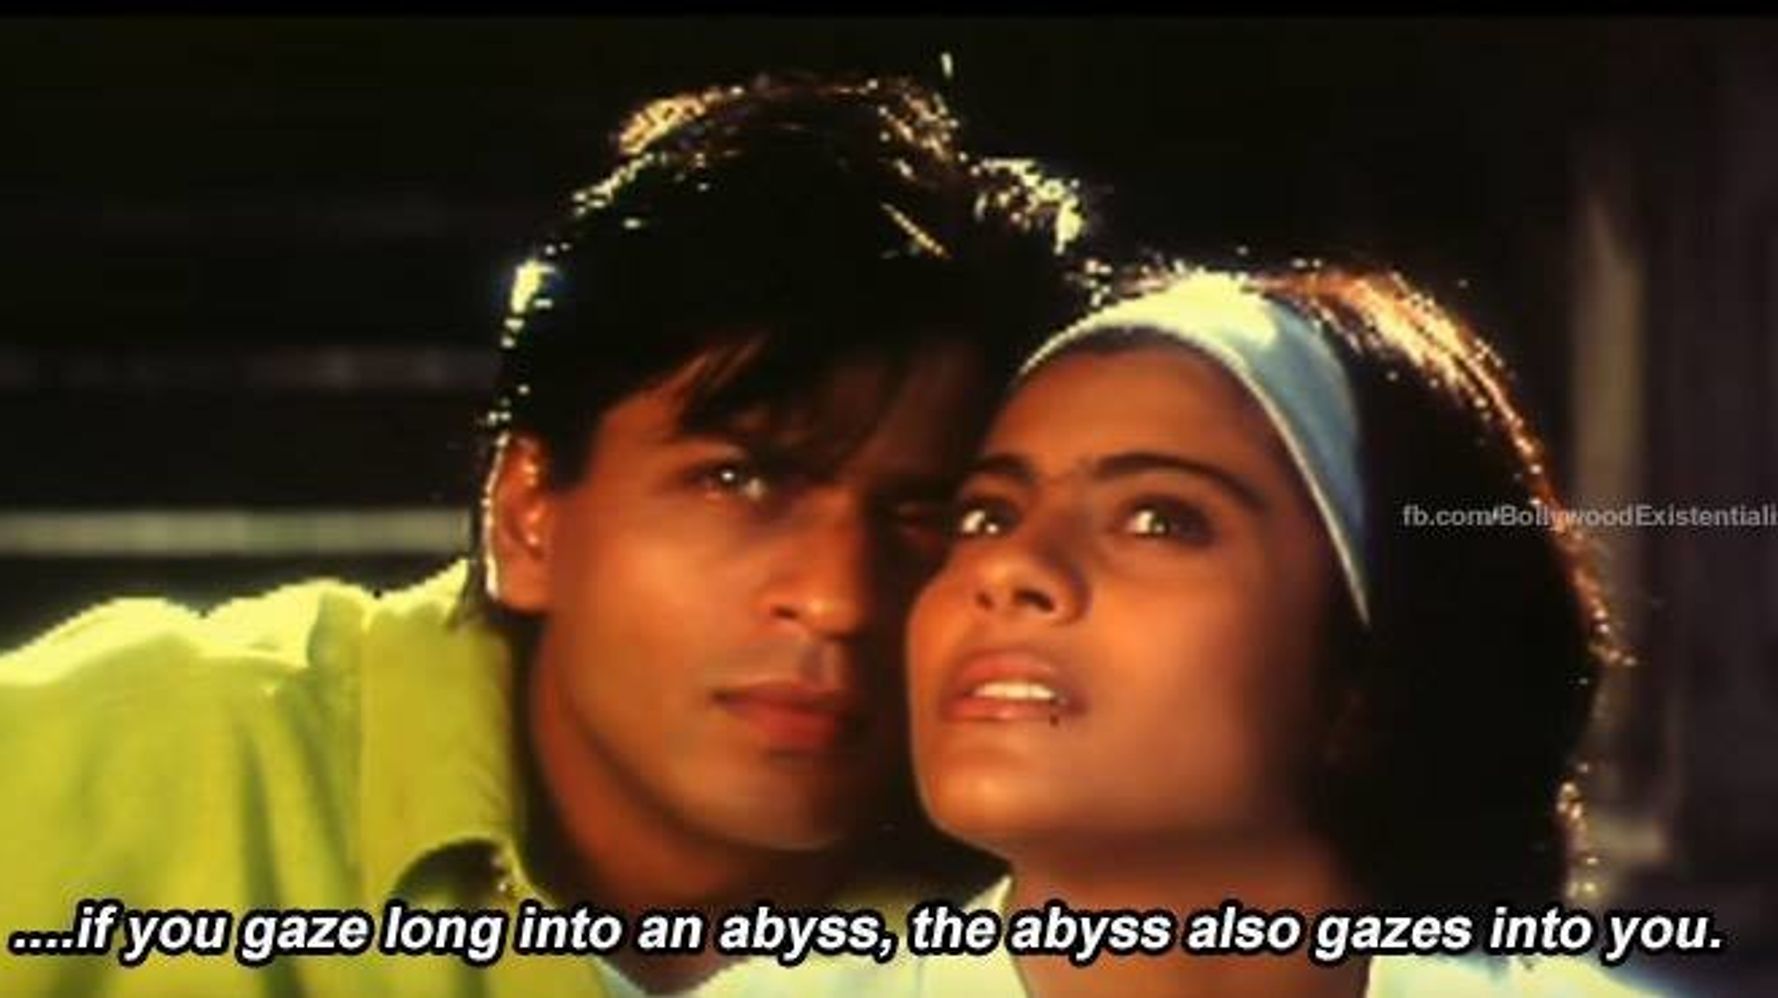 These Bollywood Memes With Existential Captions Are Damn Hilarious